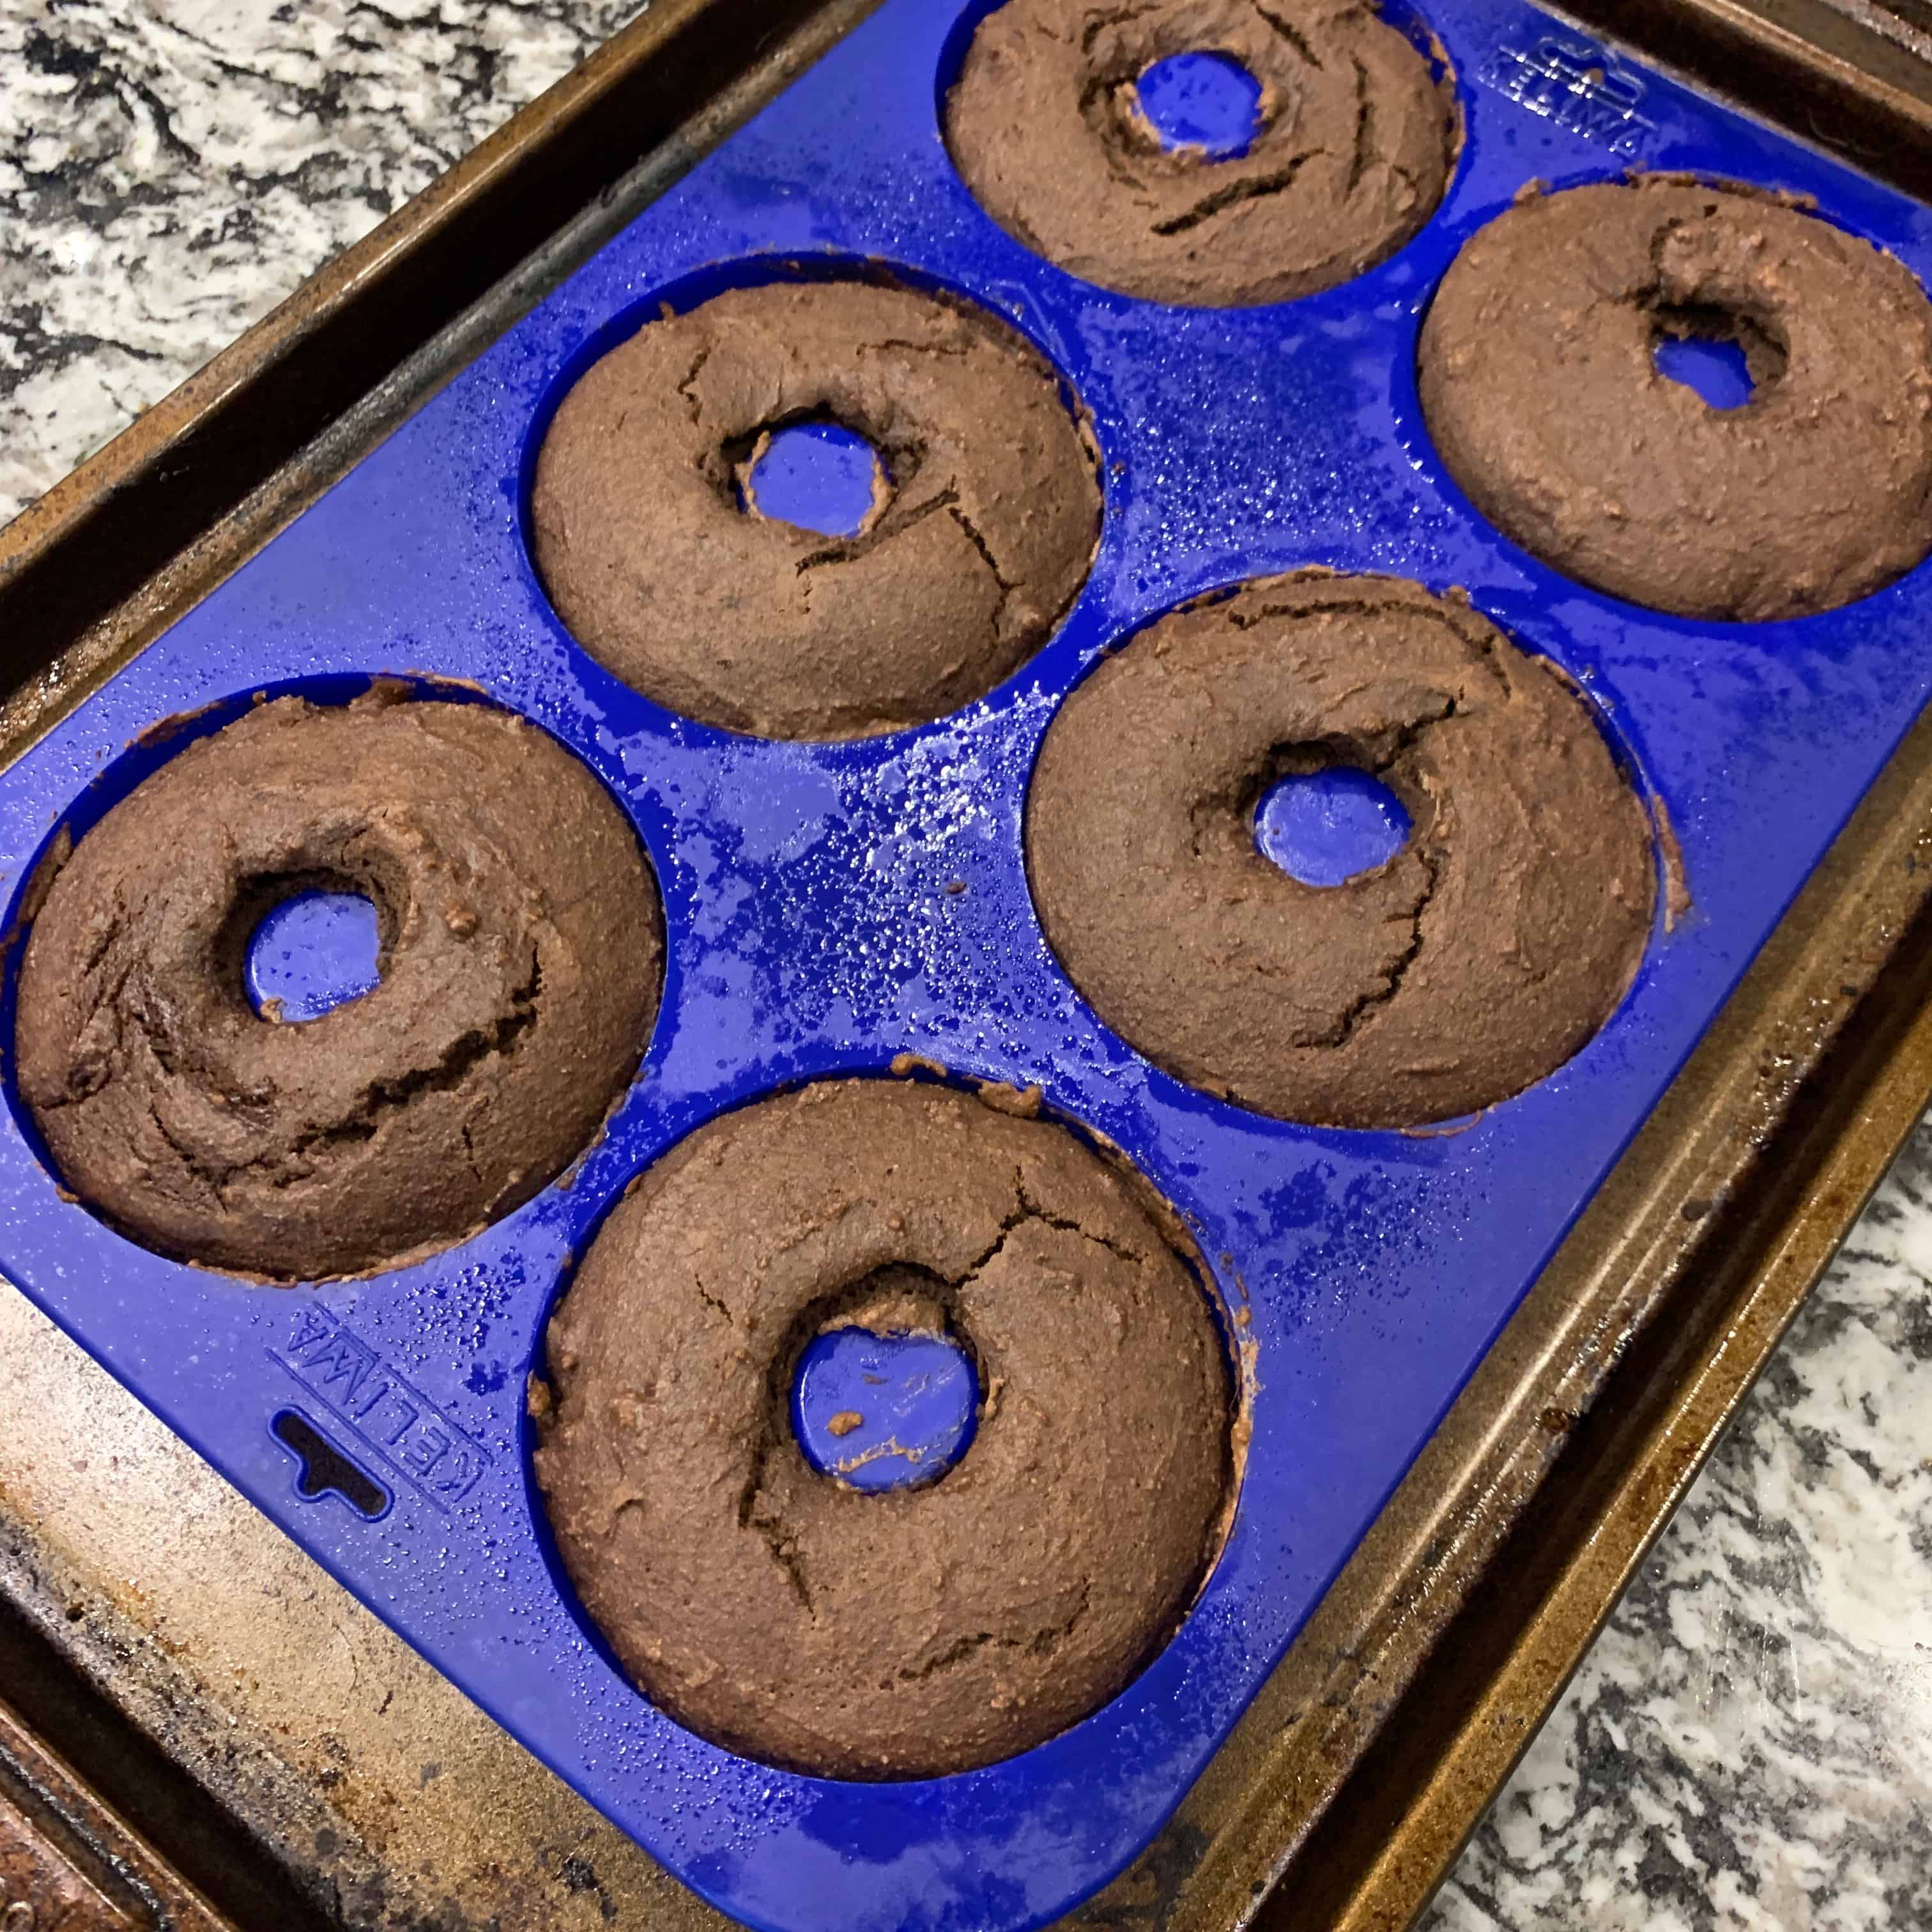 baked donuts after coming out of the oven